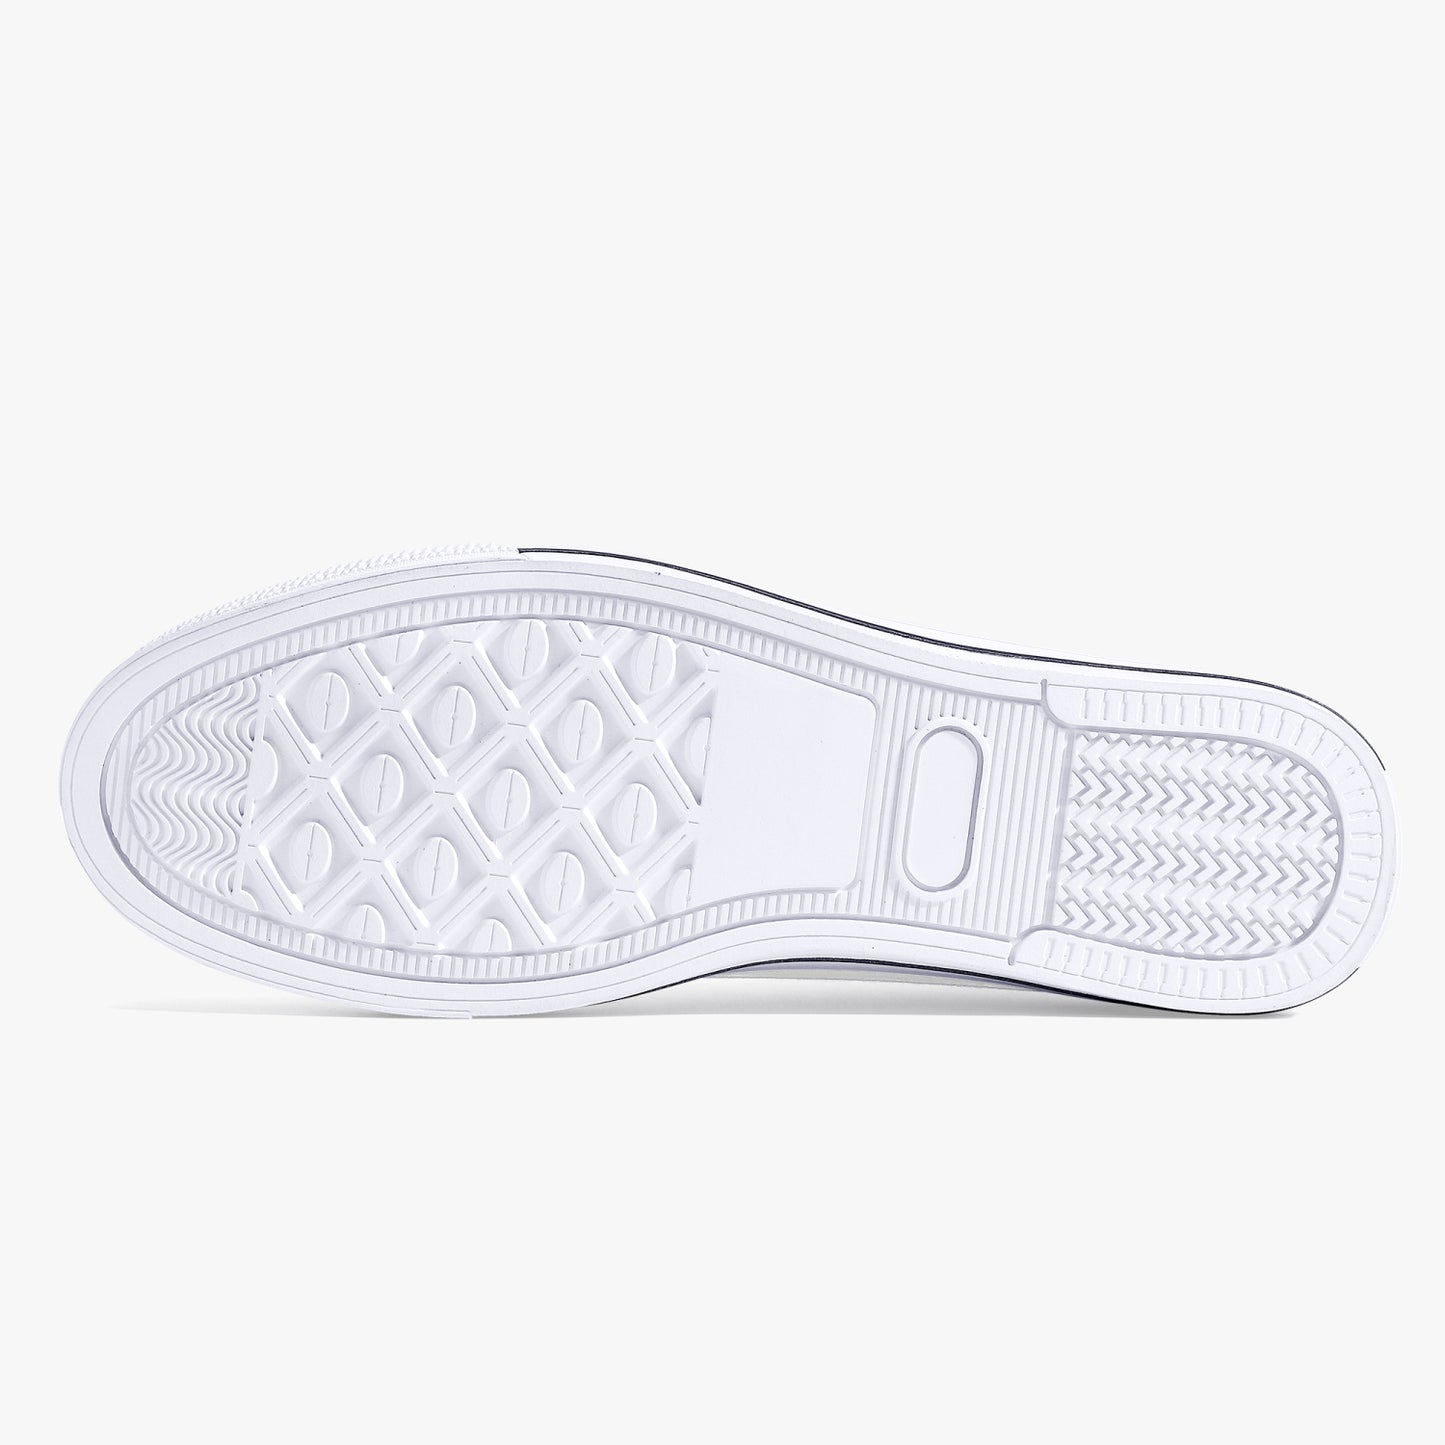 Low-Top Shoes - Roma - women's